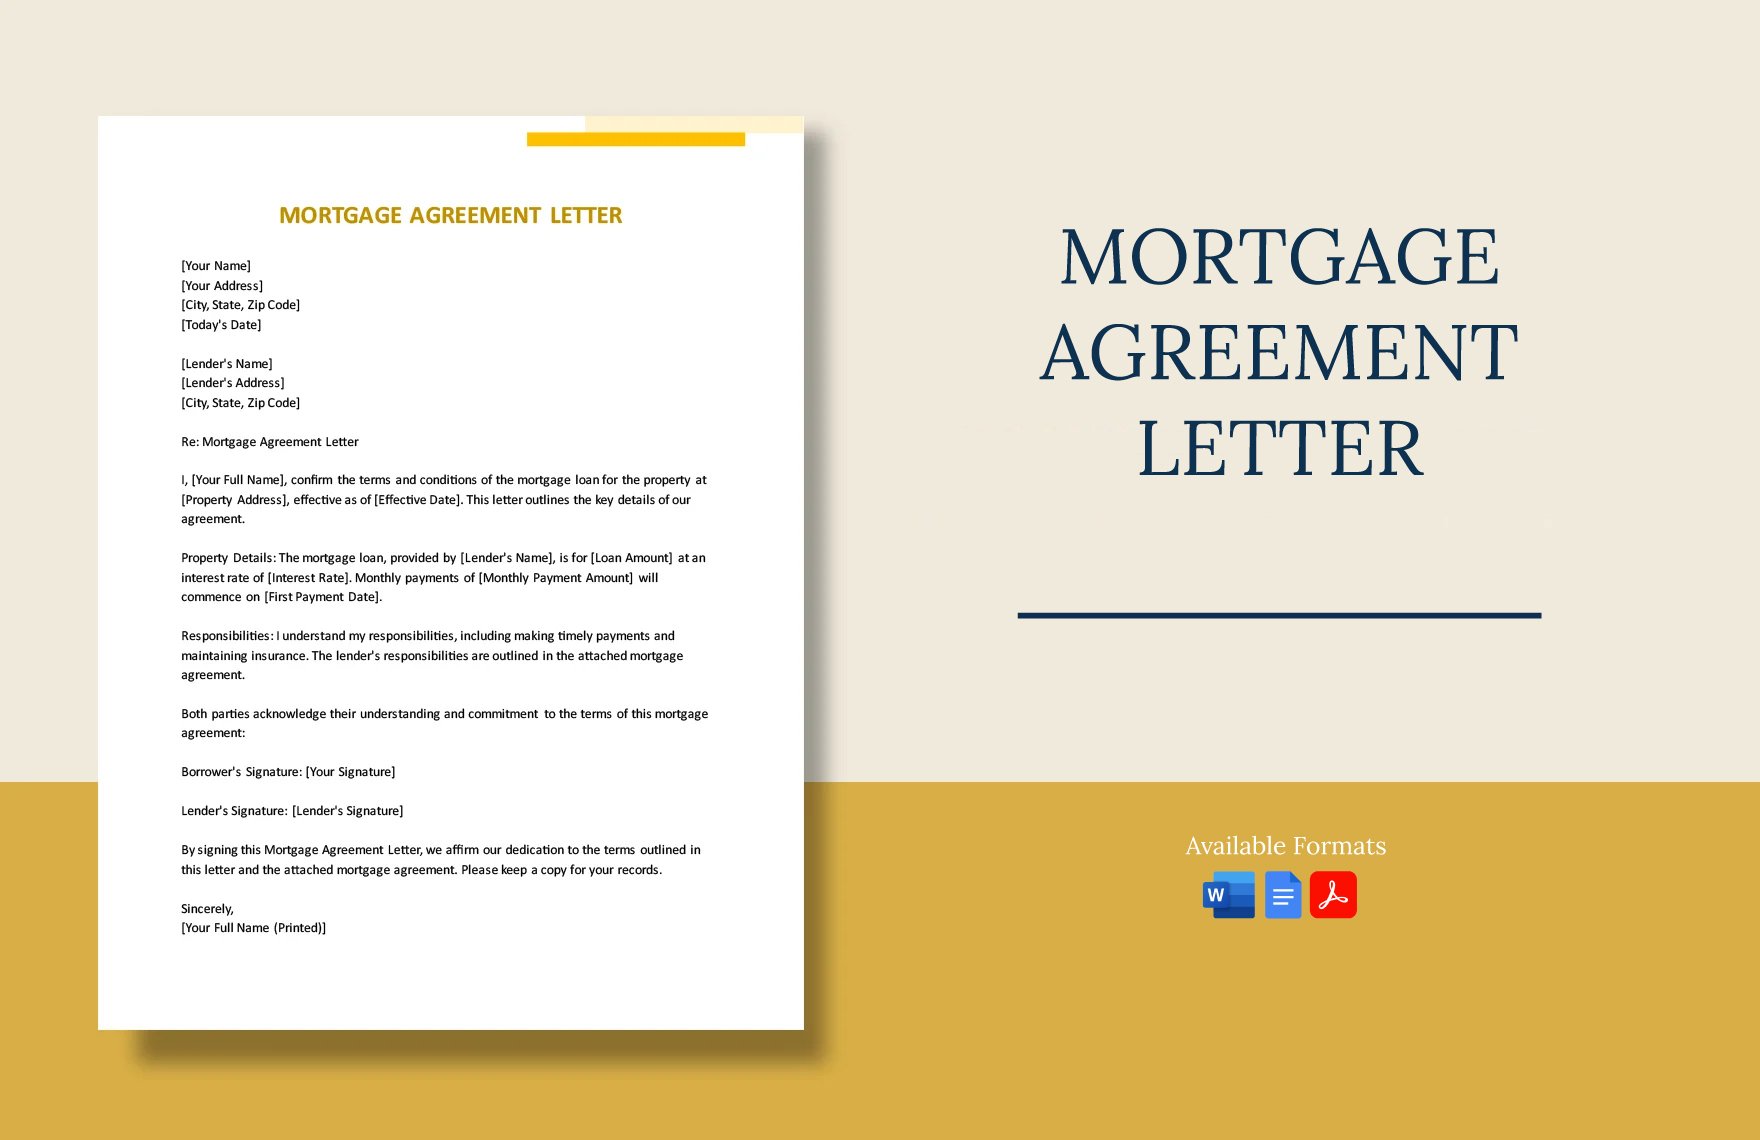 Mortgage Agreement Letter in Word, Google Docs, PDF